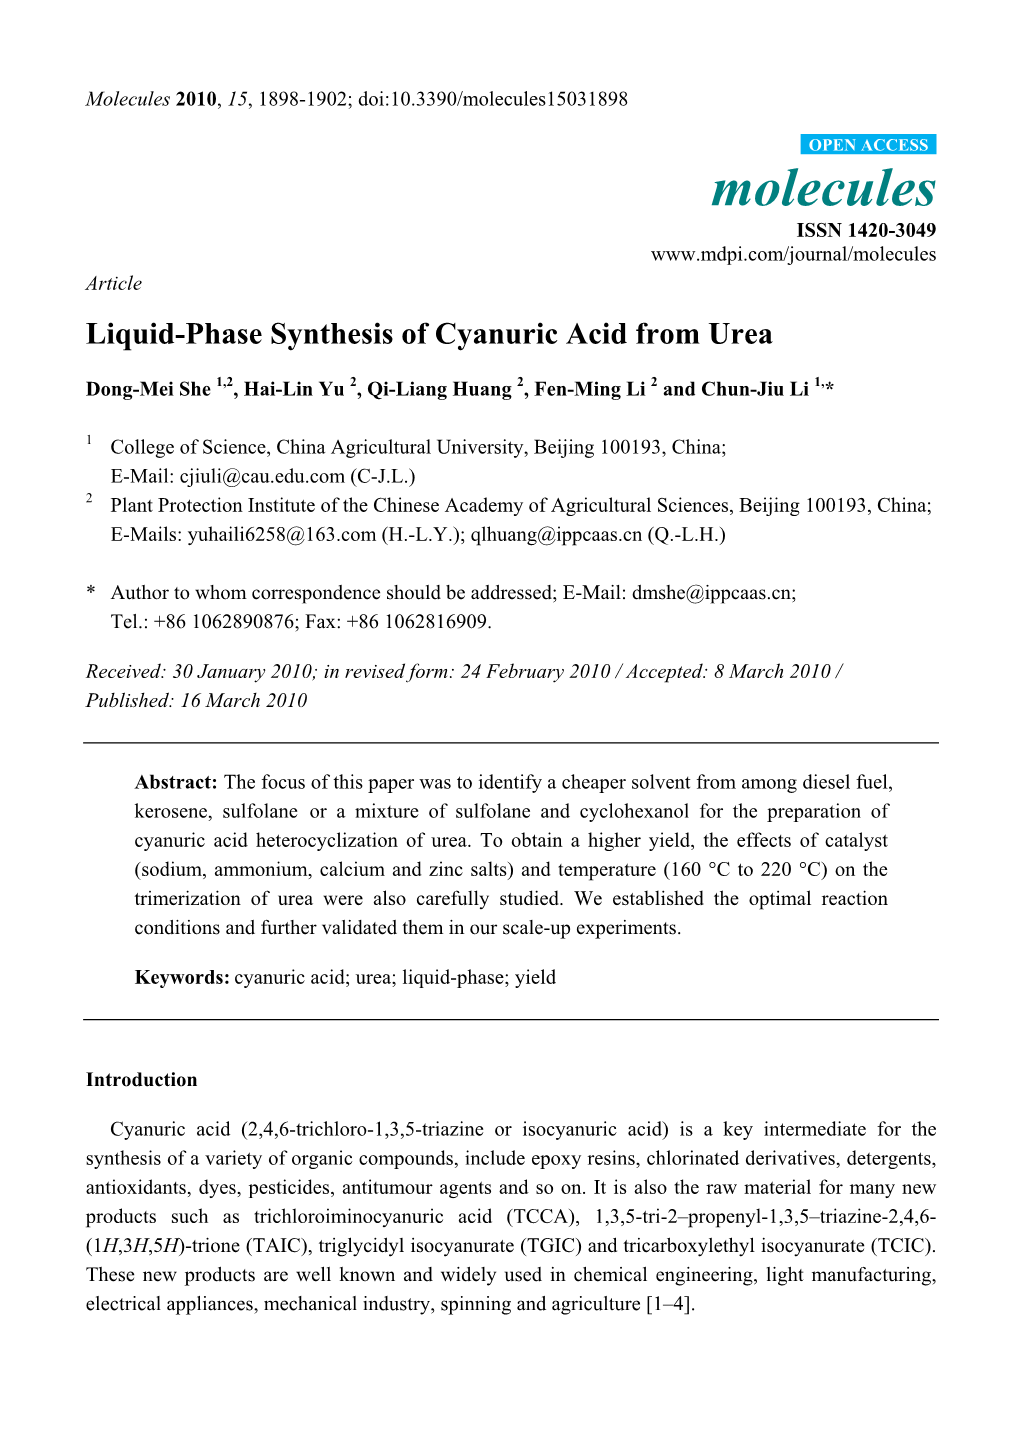 Liquid-Phase Synthesis of Cyanuric Acid from Urea